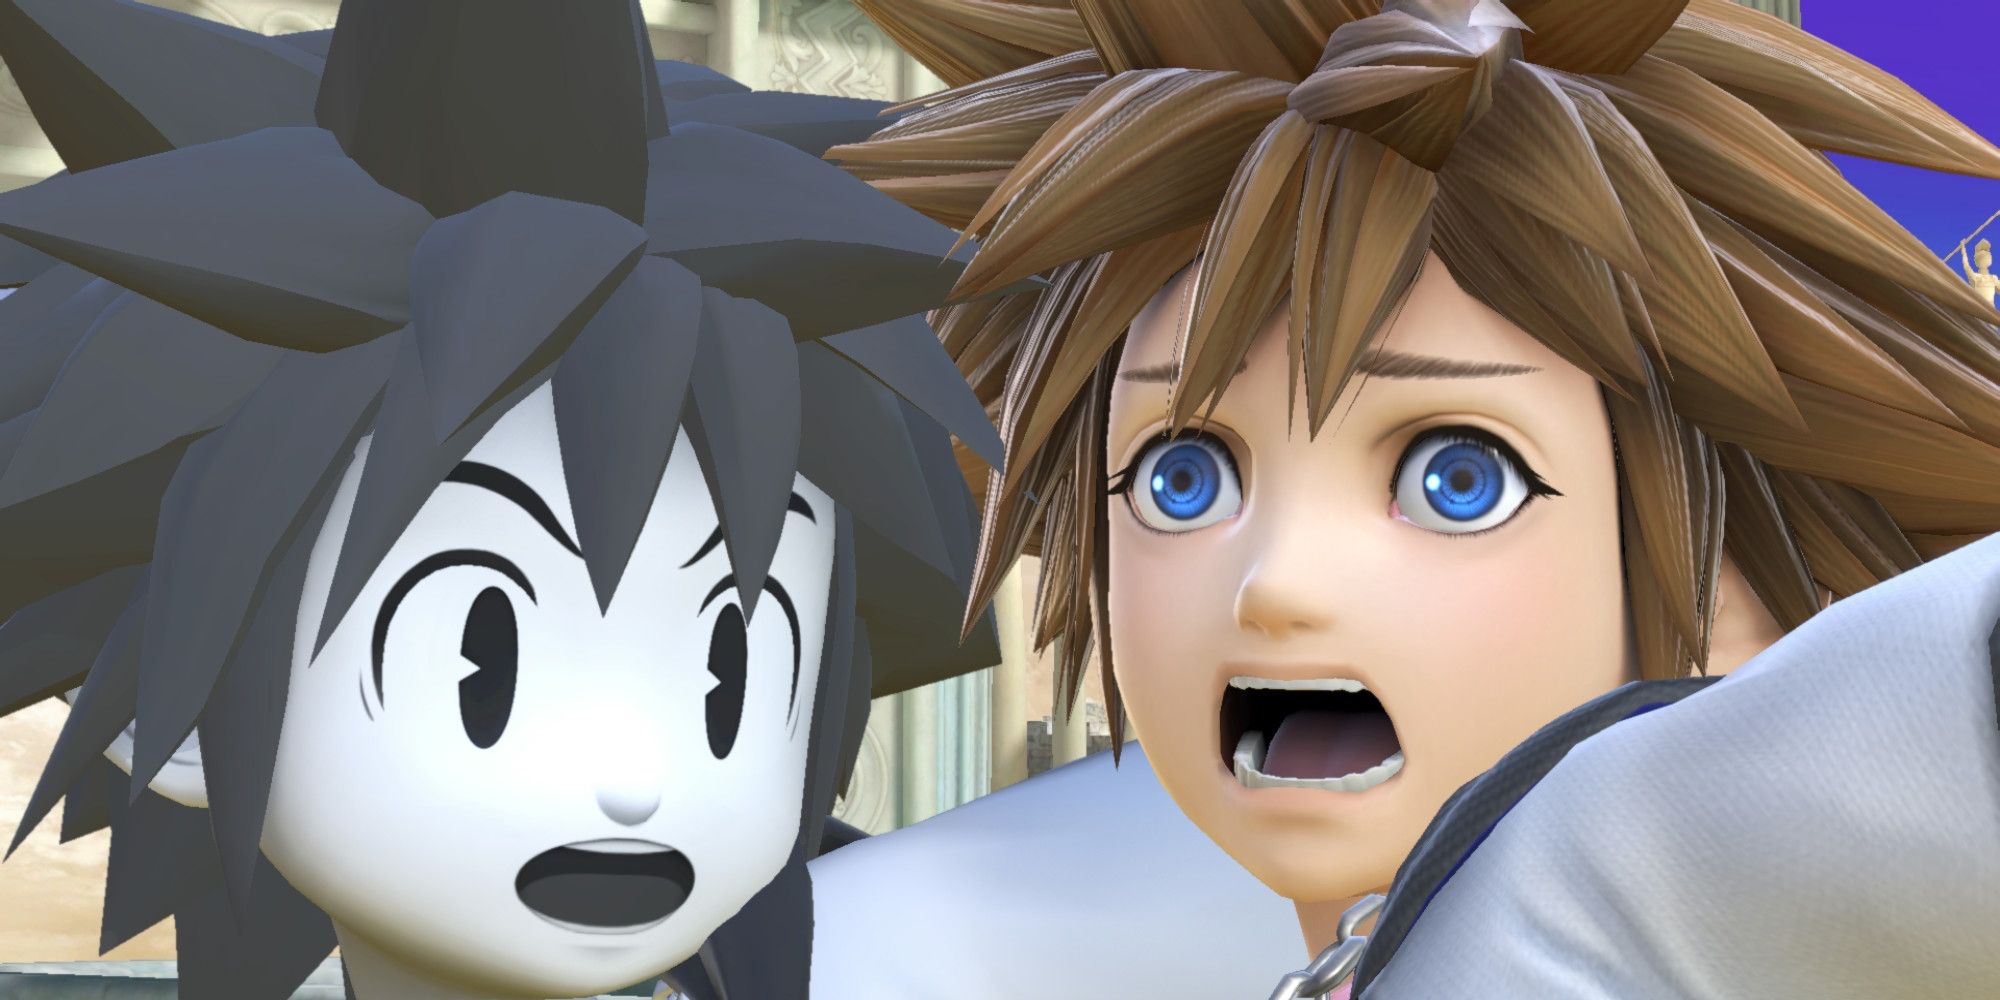 Not only will Sora receive an amiibo, I am willing to bet he will receive  multiple, due to Nintendo/Disney going all out with his alts, and him being  the final fighter like